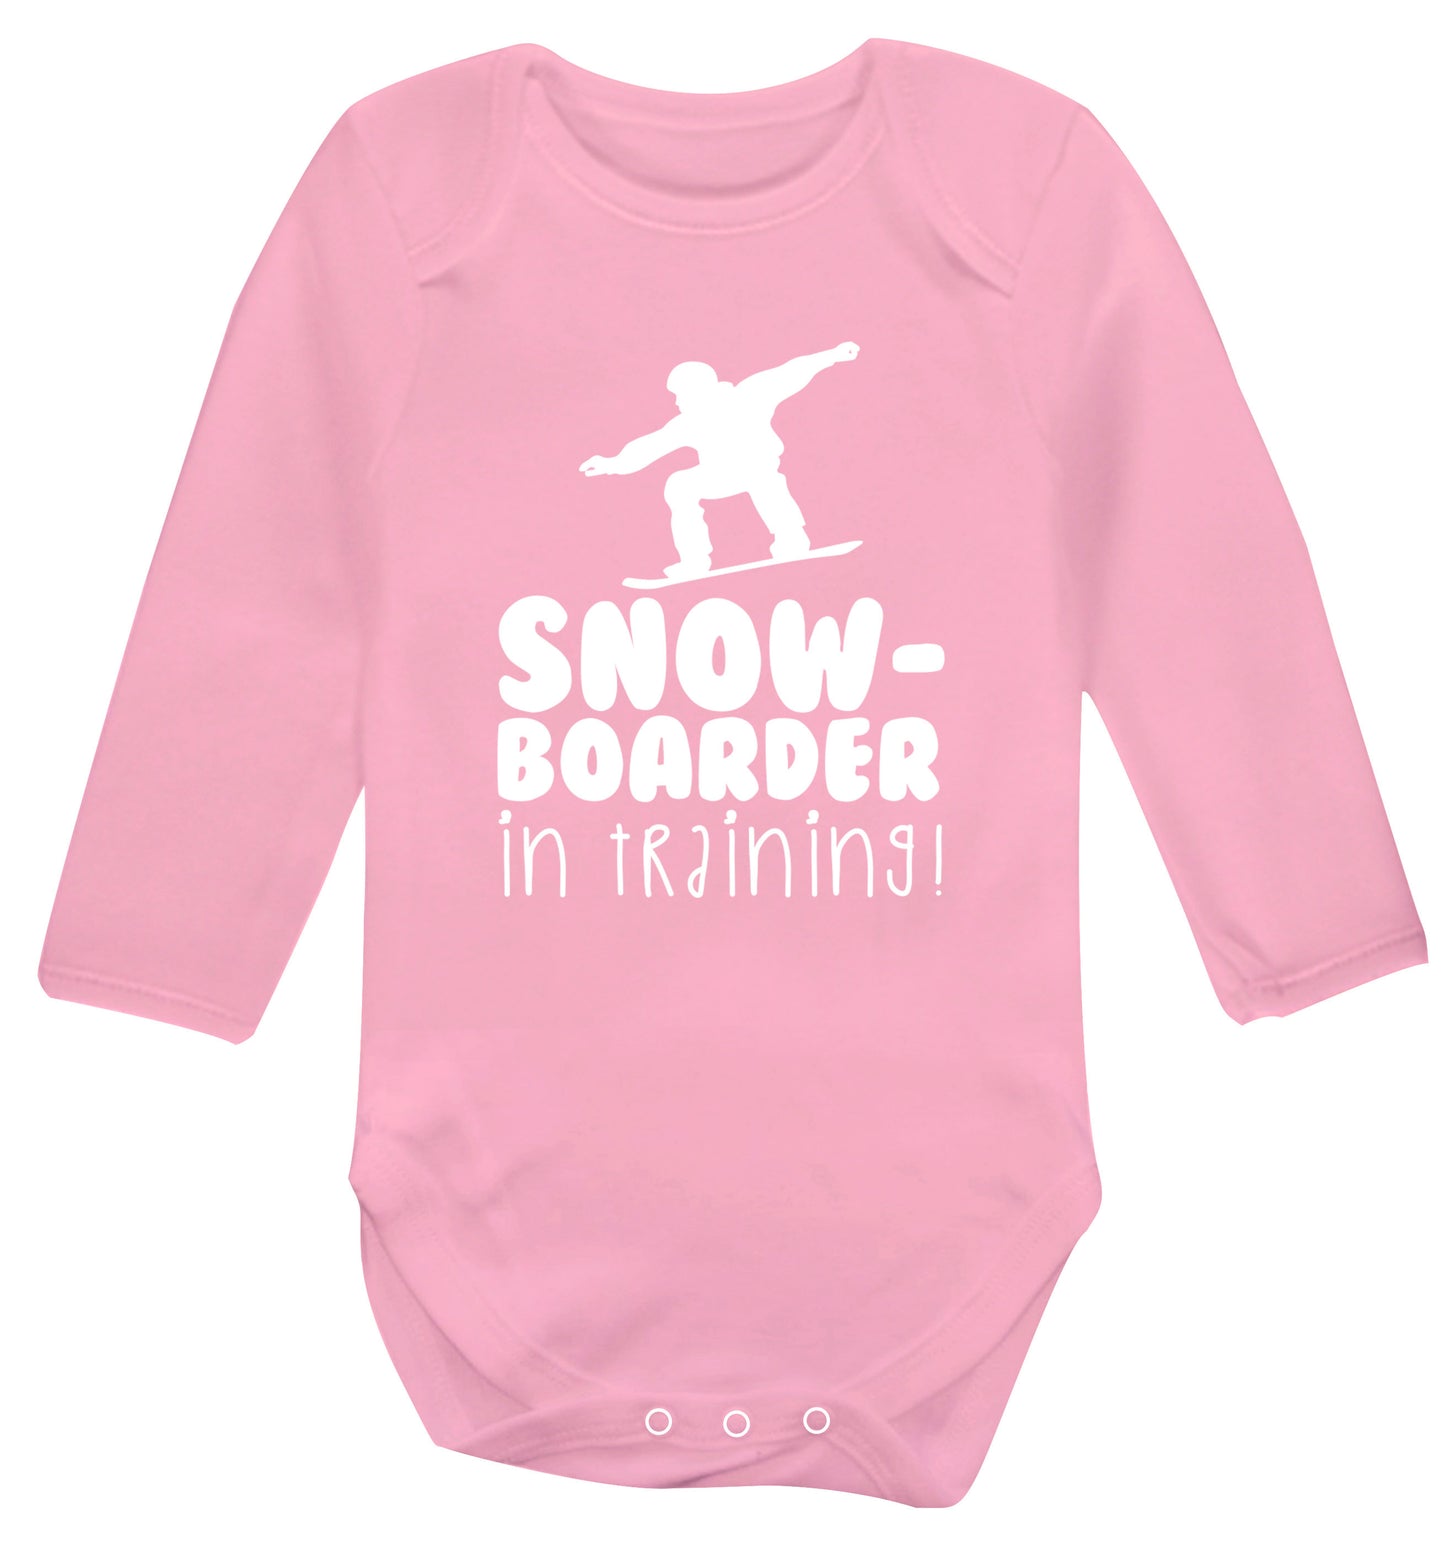 Snowboarder in training Baby Vest long sleeved pale pink 6-12 months